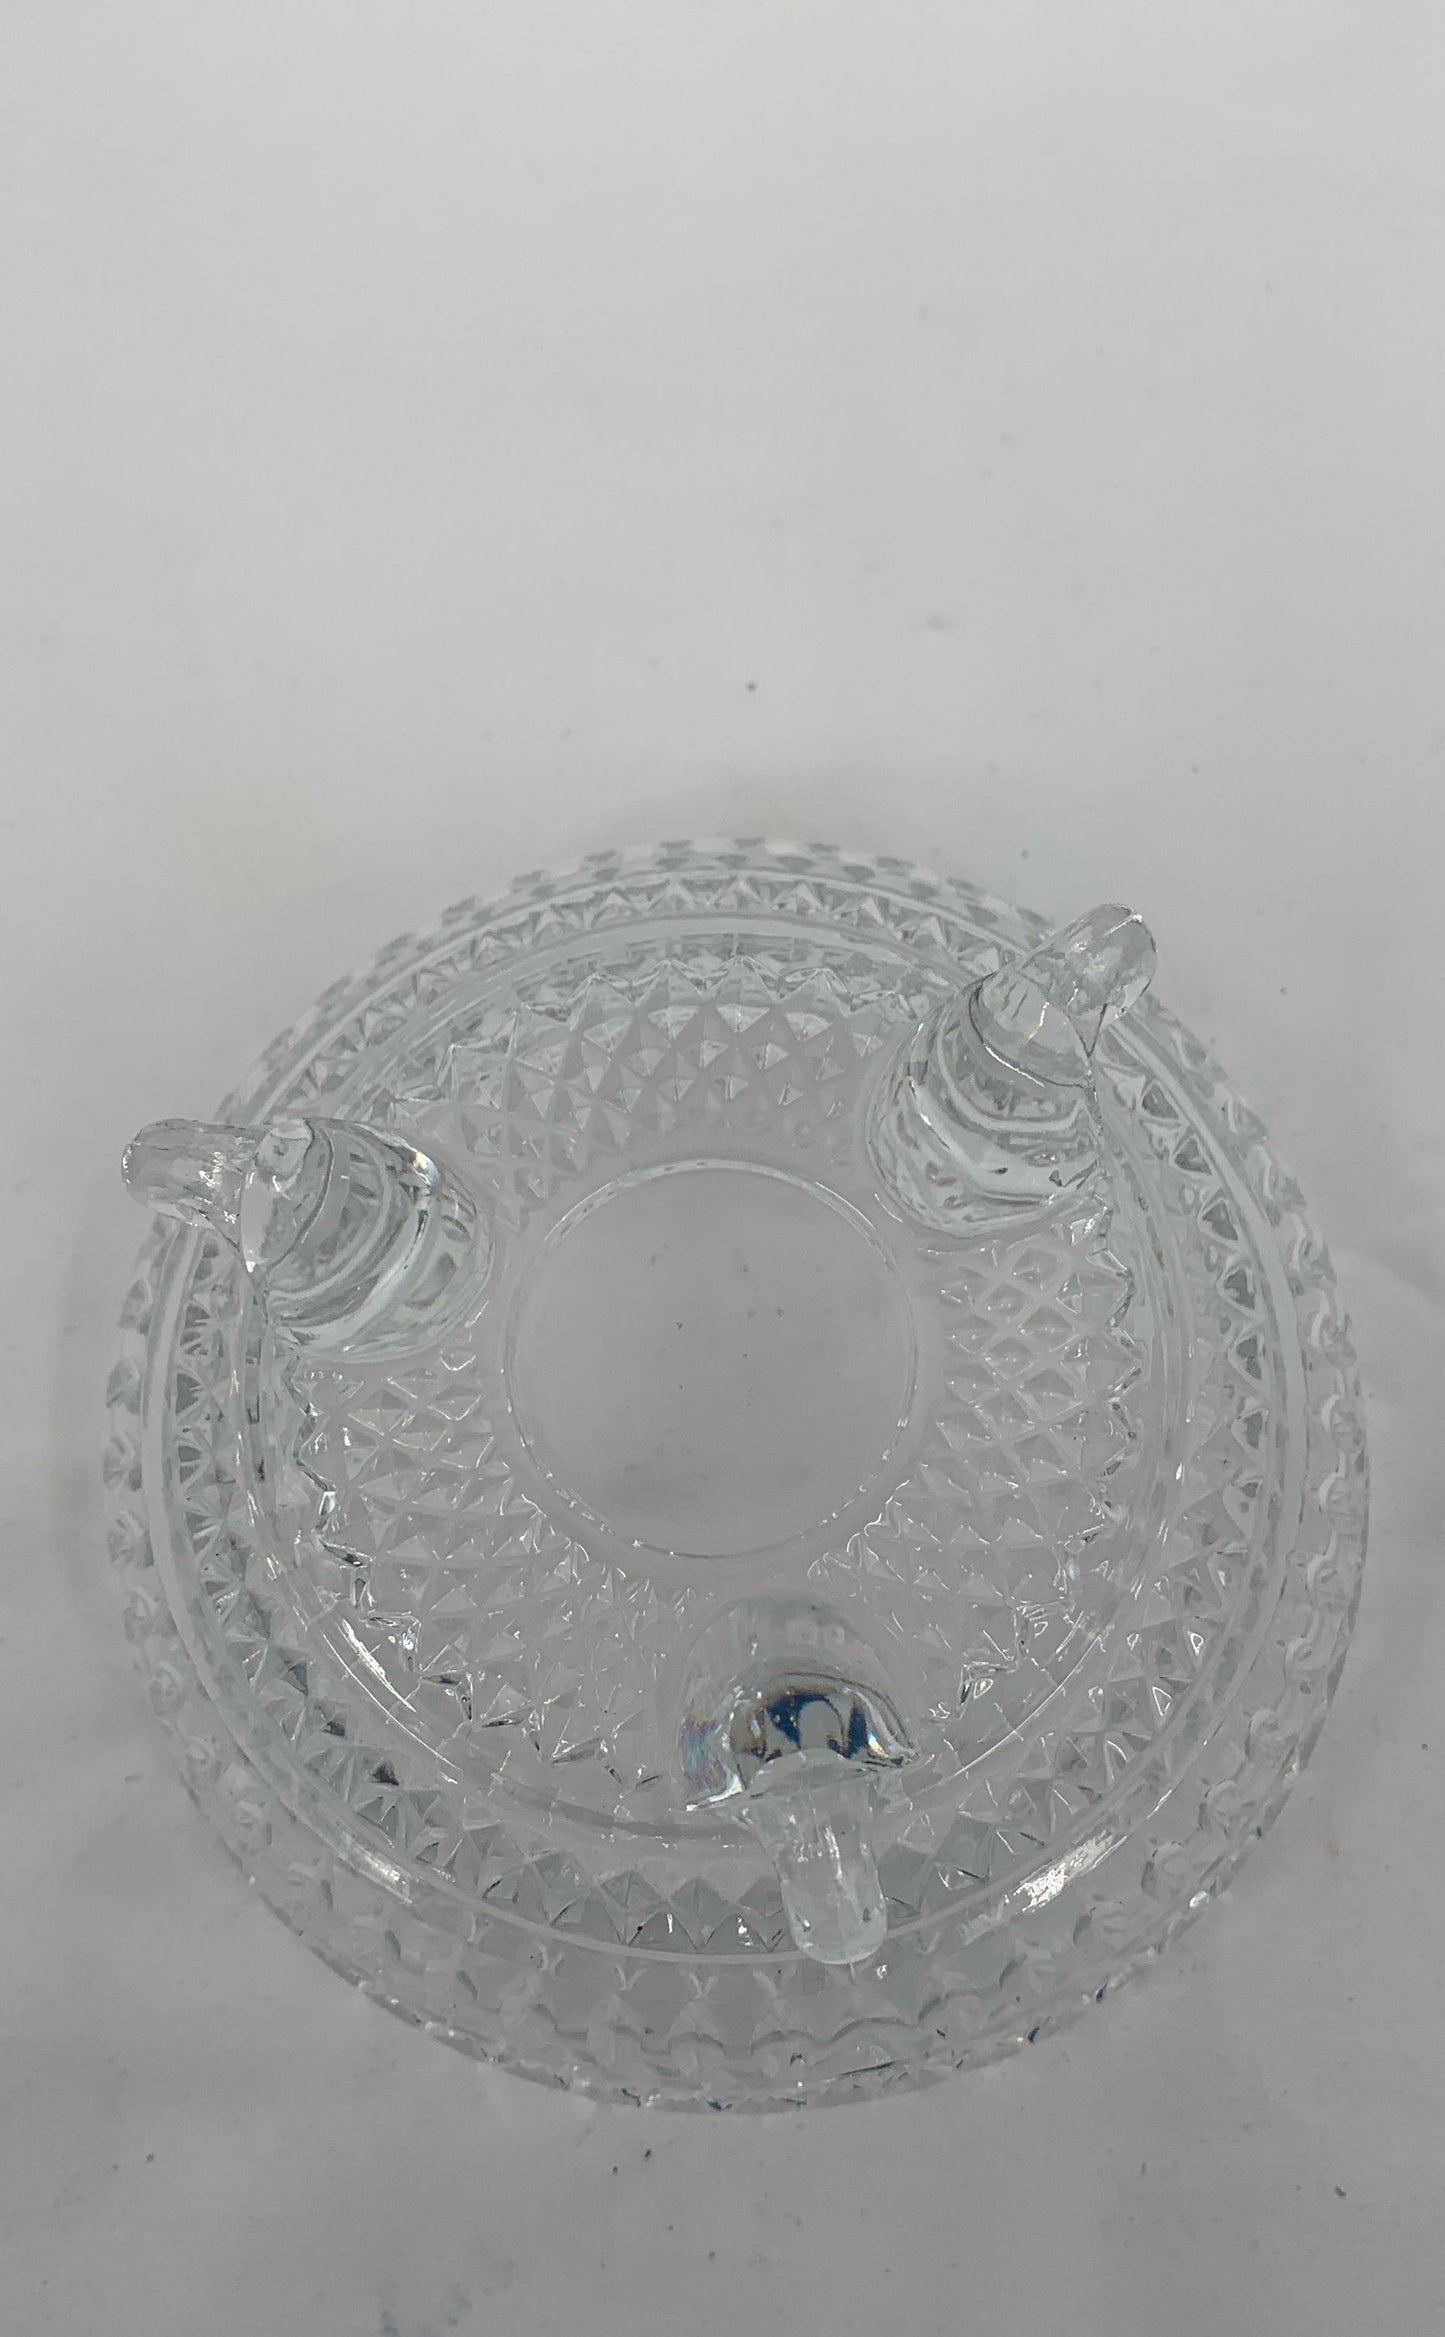 Bleikristall 24% Crystal Candy Dish With Lid Bavaria Germany